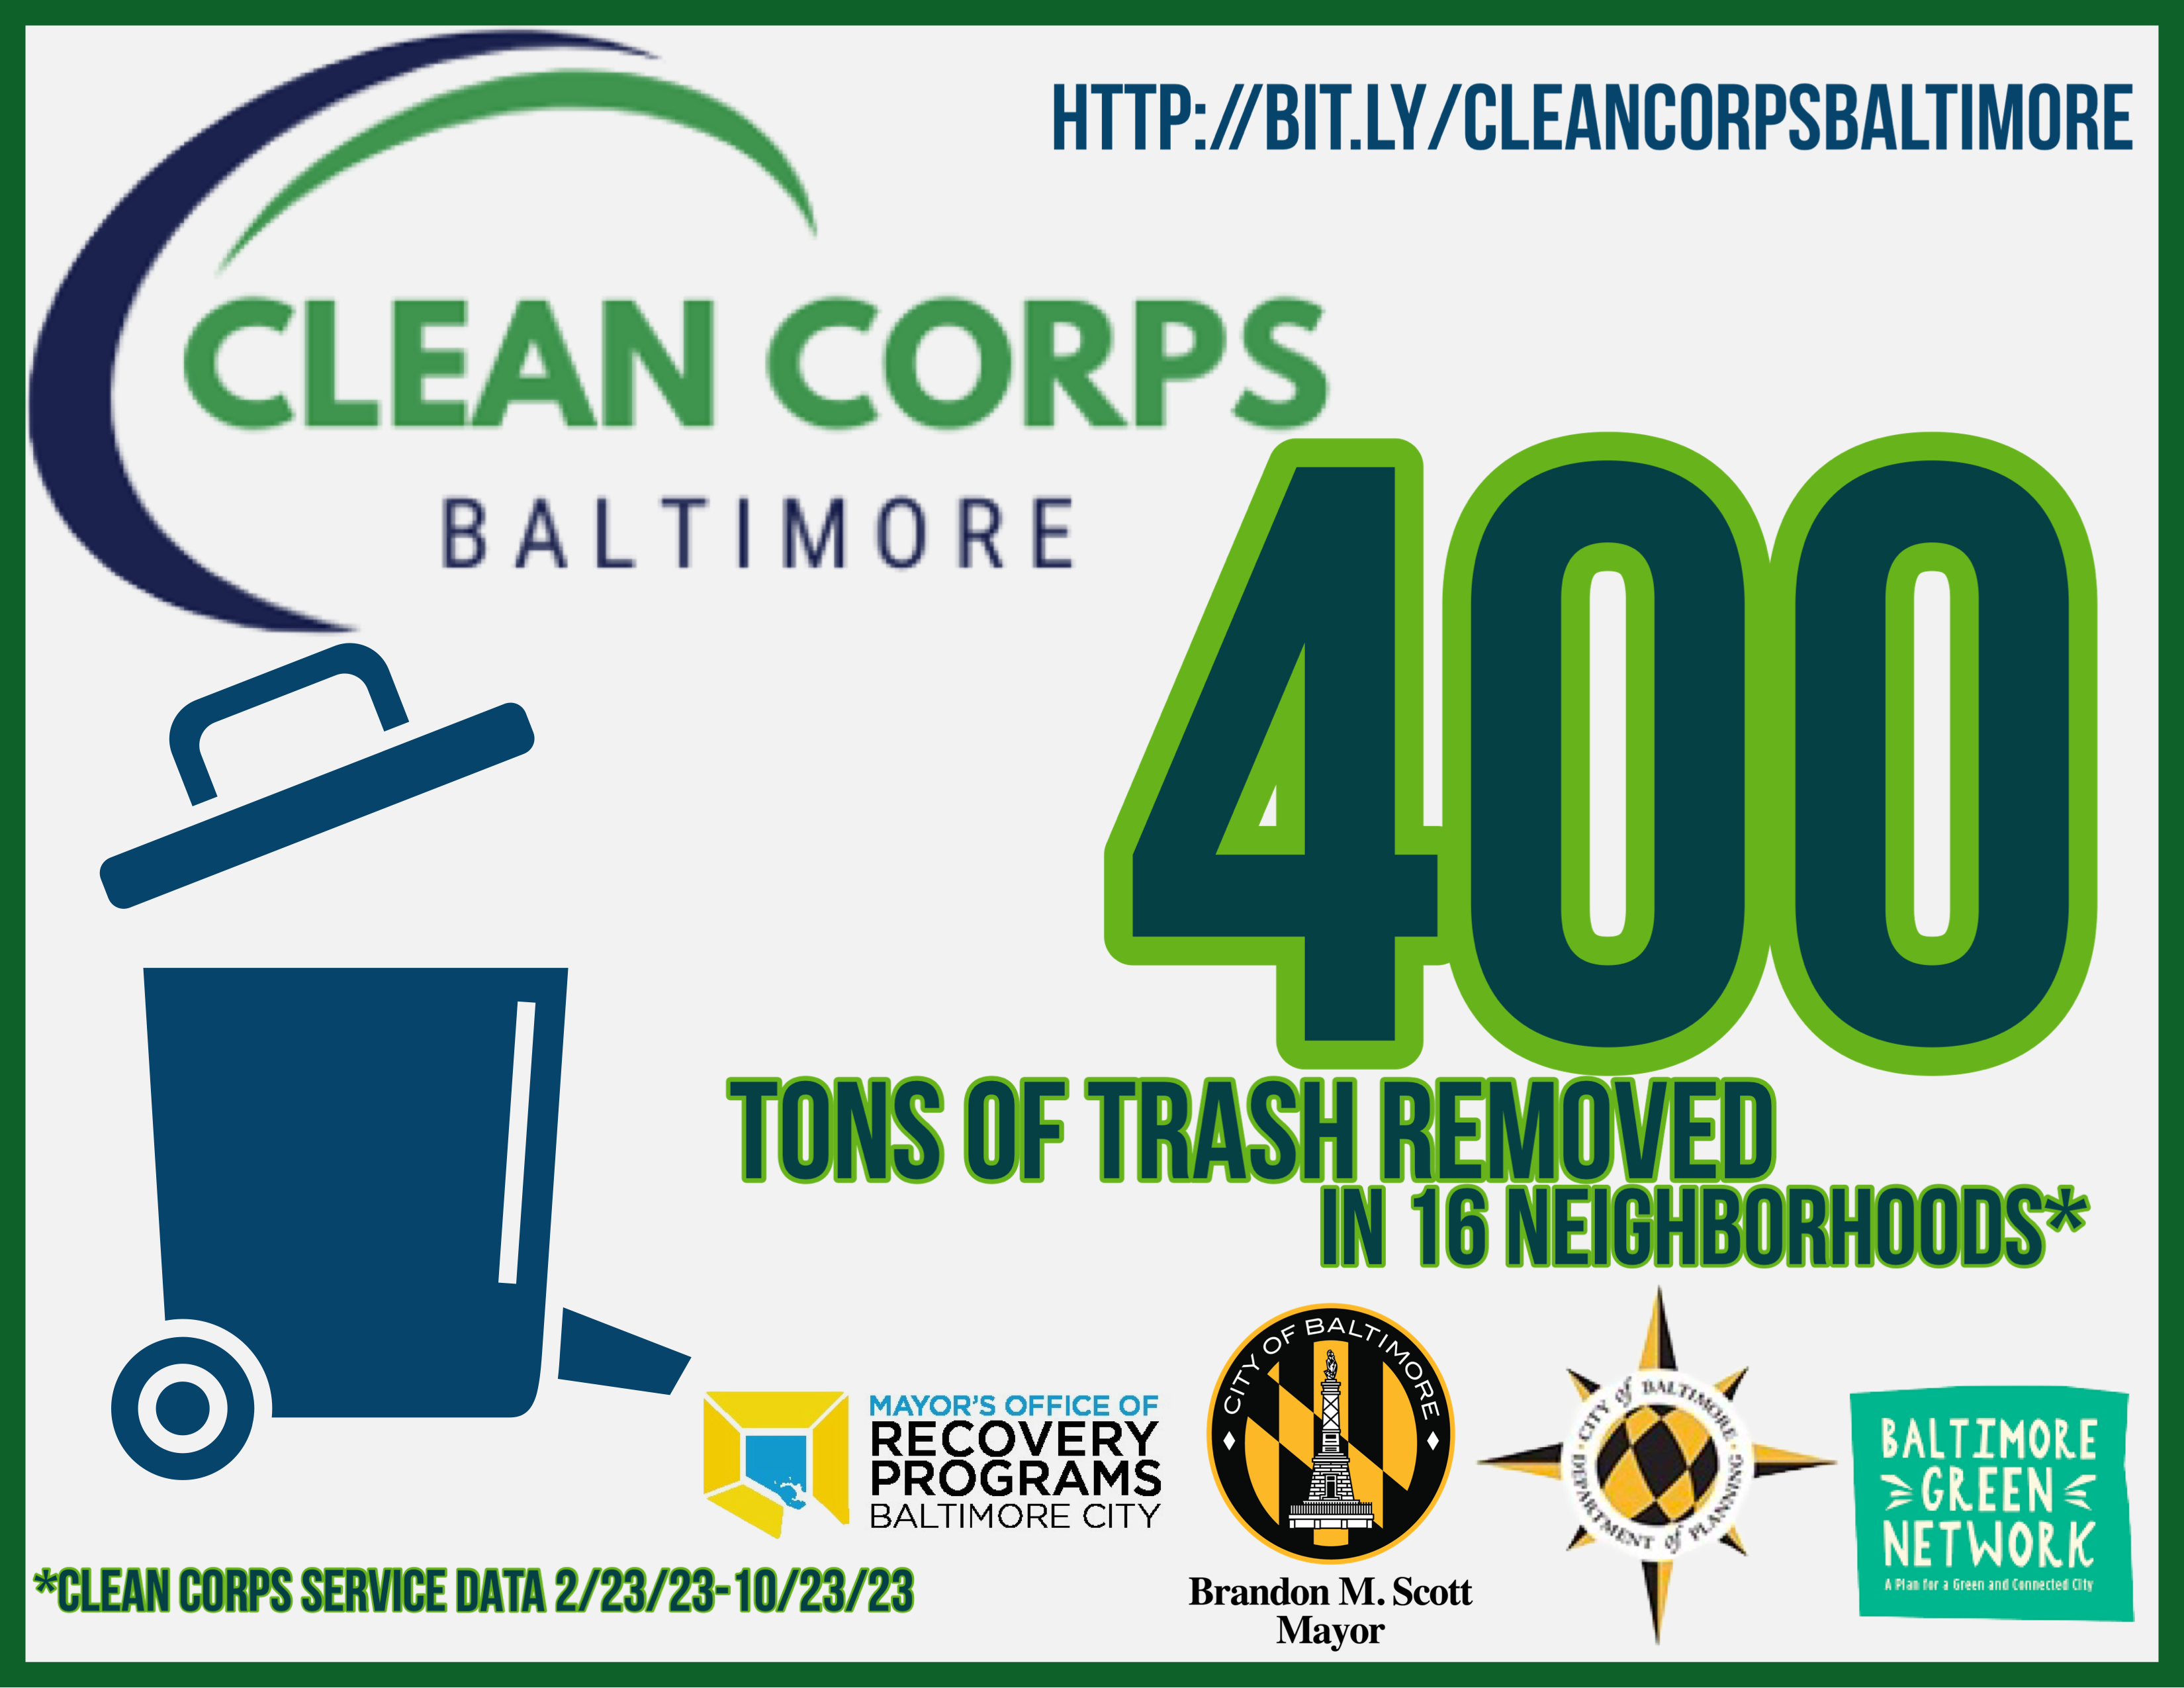 Clean Corps has removed over 400 tons of trash